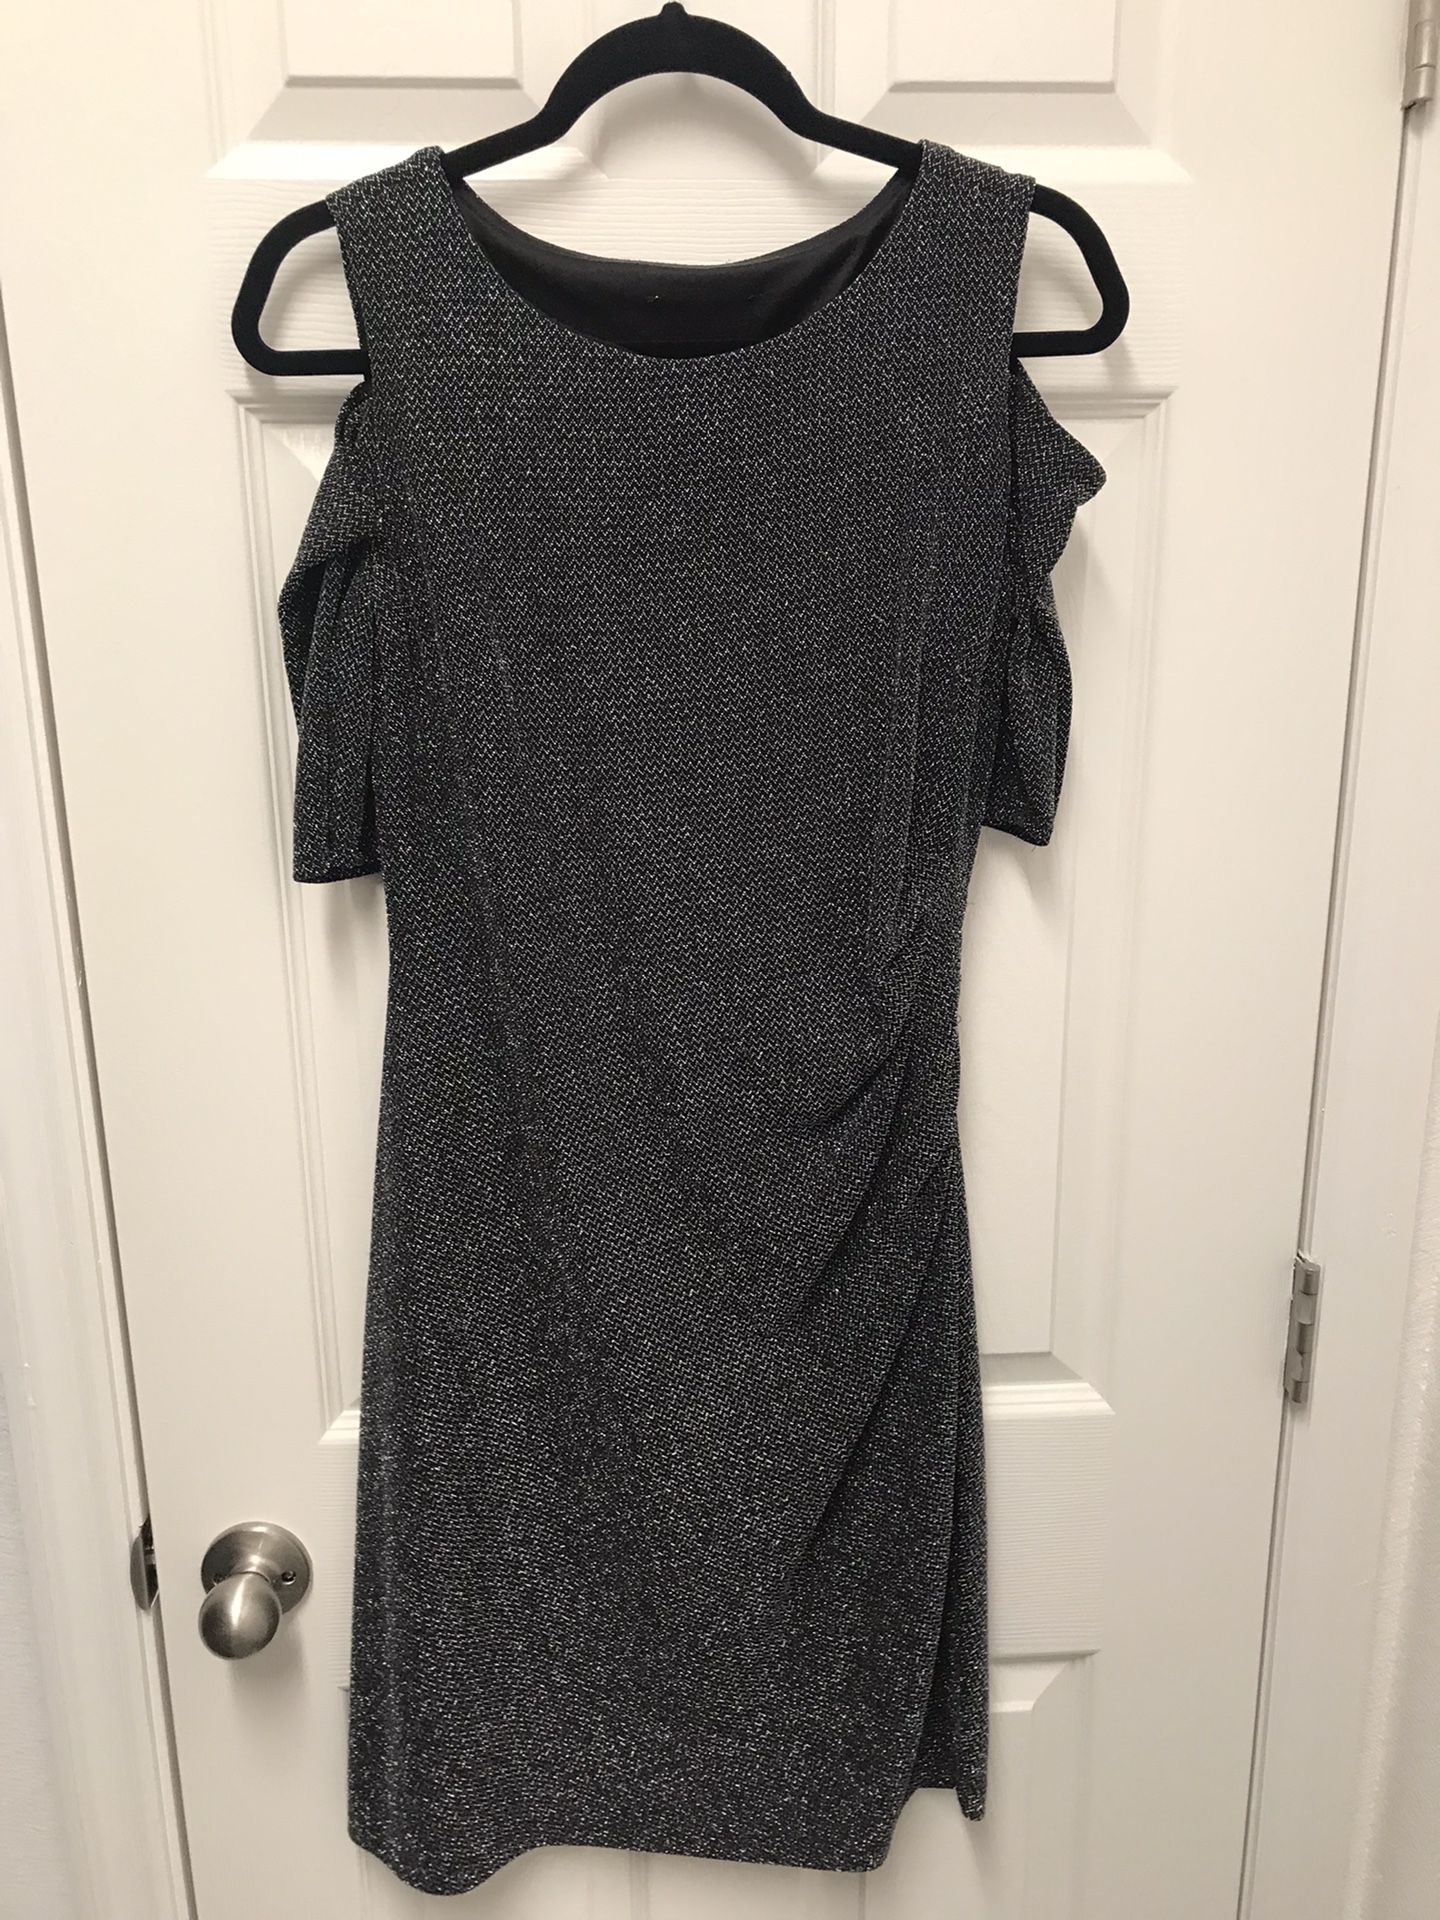 Double Layer Black Sparkly Party Dress XL